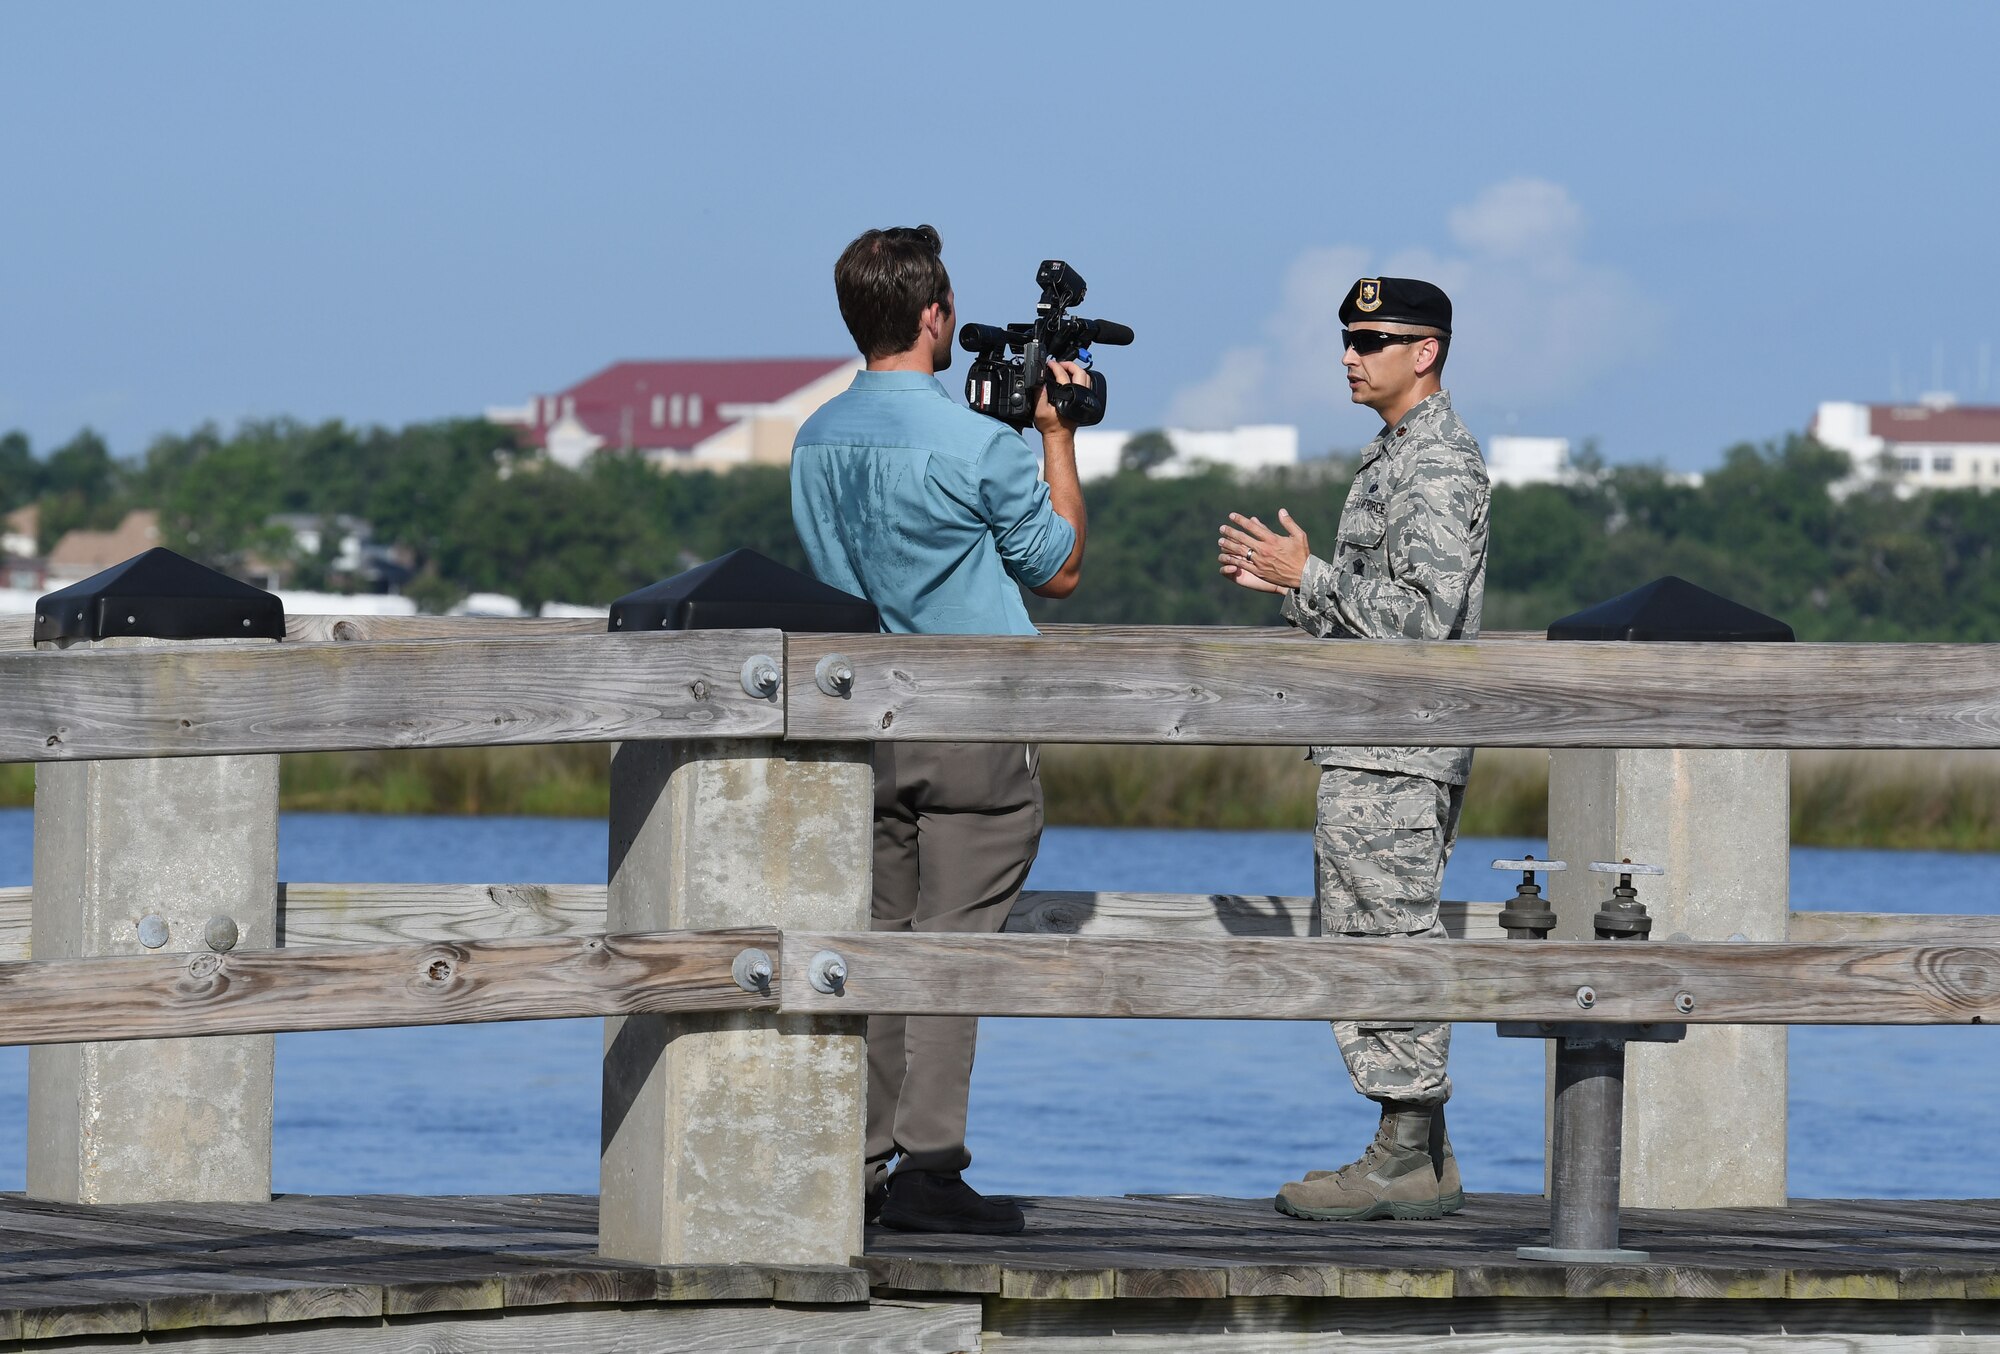 Jonathan Brannan, WLOX News reporter, interviews U.S Air Force Maj. Jonathon Murray, 81st Security Forces Squadron commander, at The Marina at Keesler Air Force Base, Mississippi, May 23, 2018. Keesler and the Department of Marine Resources partnered to install 15 restricted area buoys in the Biloxi Back Bay 150 feet from the Keesler shore line as an added base security measure. (U.S. Air Force photo by Kemberly Groue)